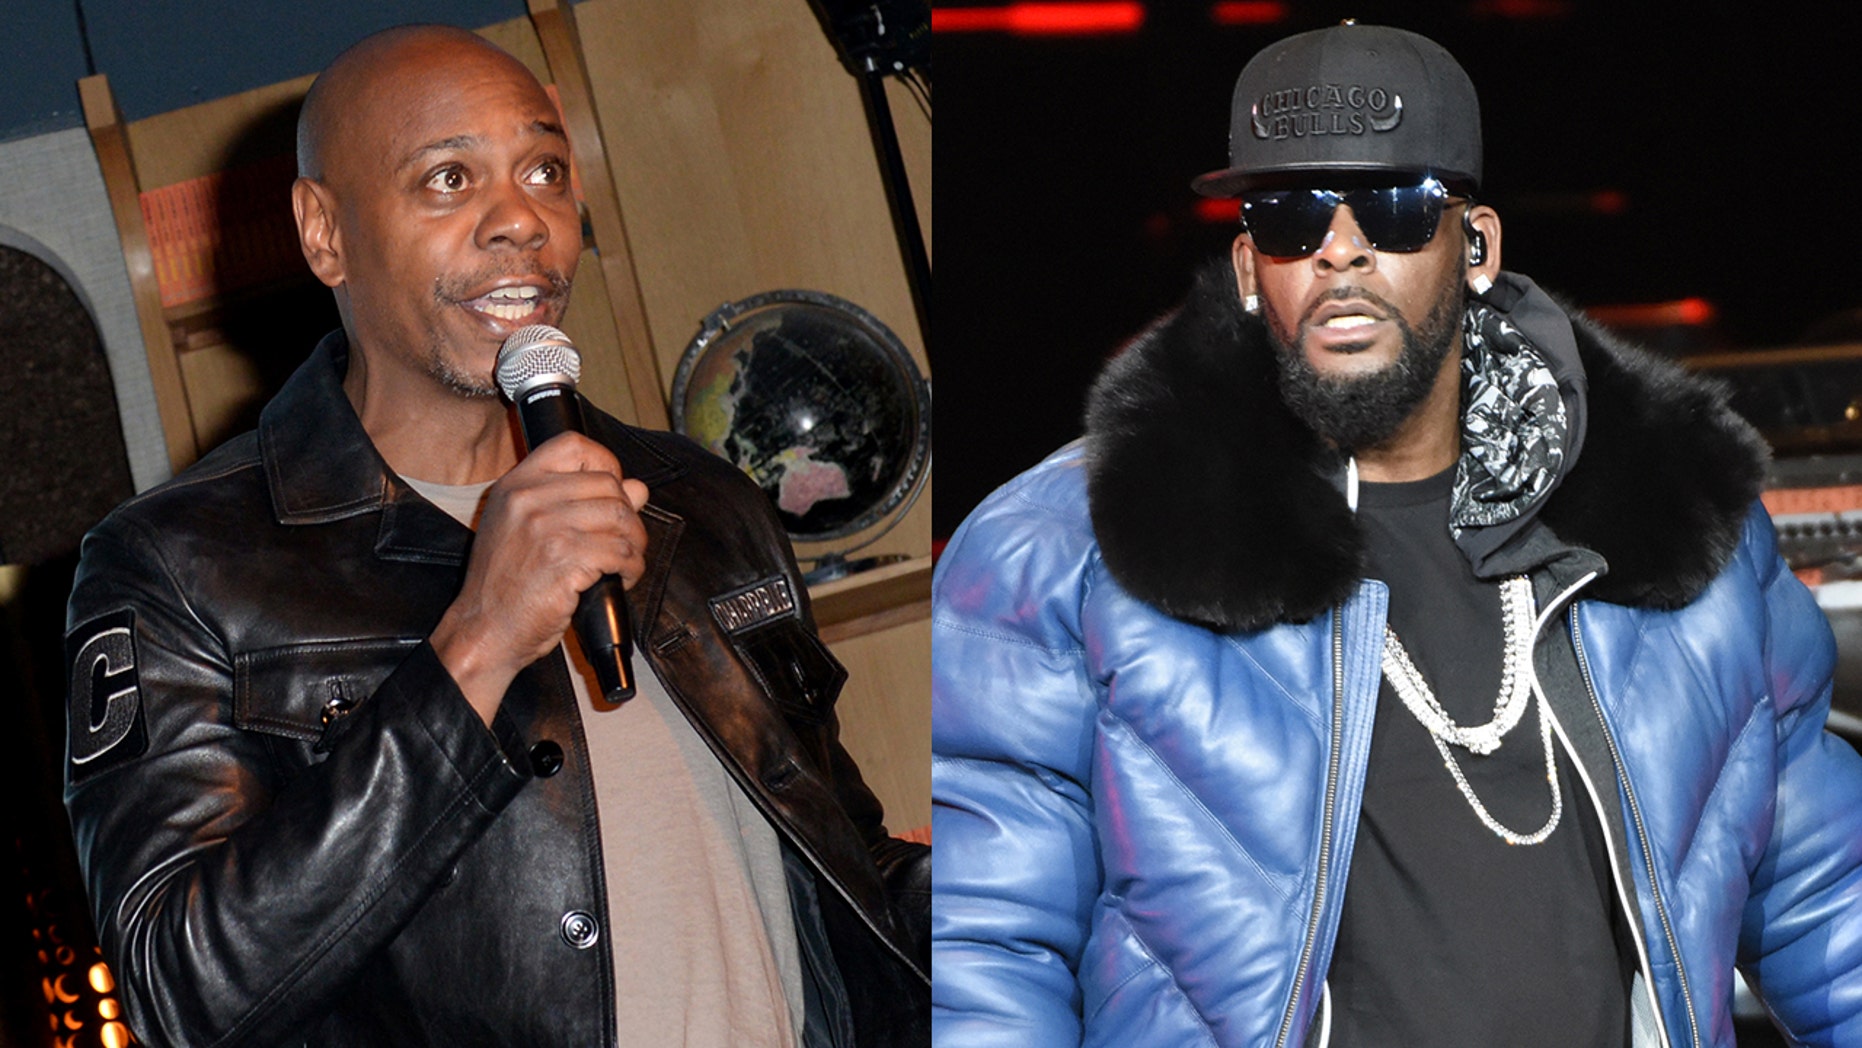 Dave Chappelle and R. Kelly allegedly almost fought over comedy skit that poked fun at the embattled singer